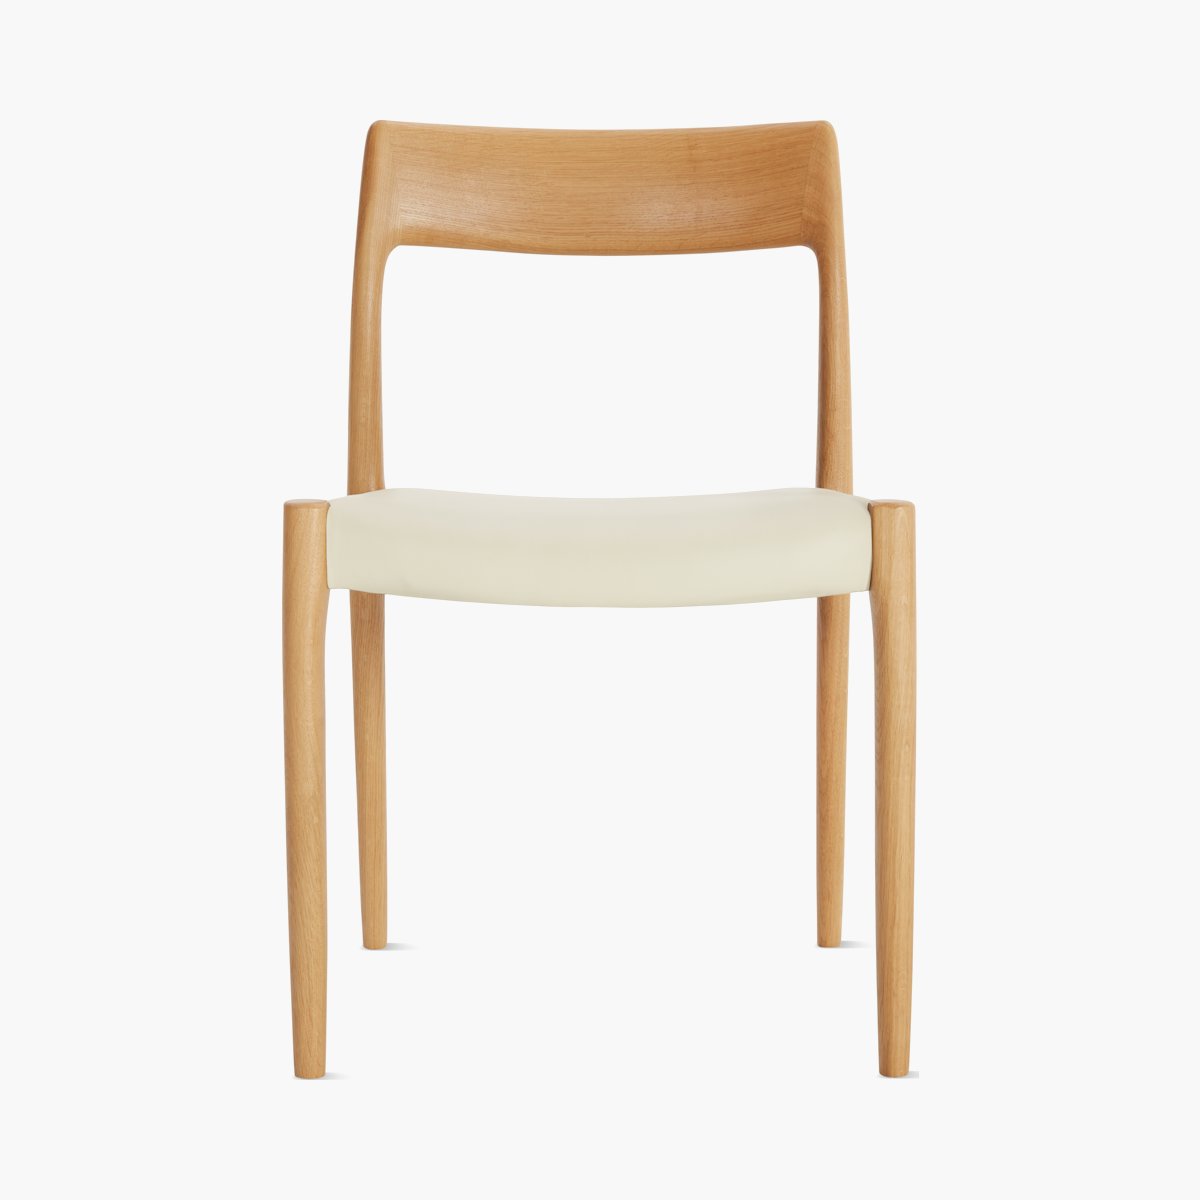 Moller Model 77 Side Chair with Leather Seat